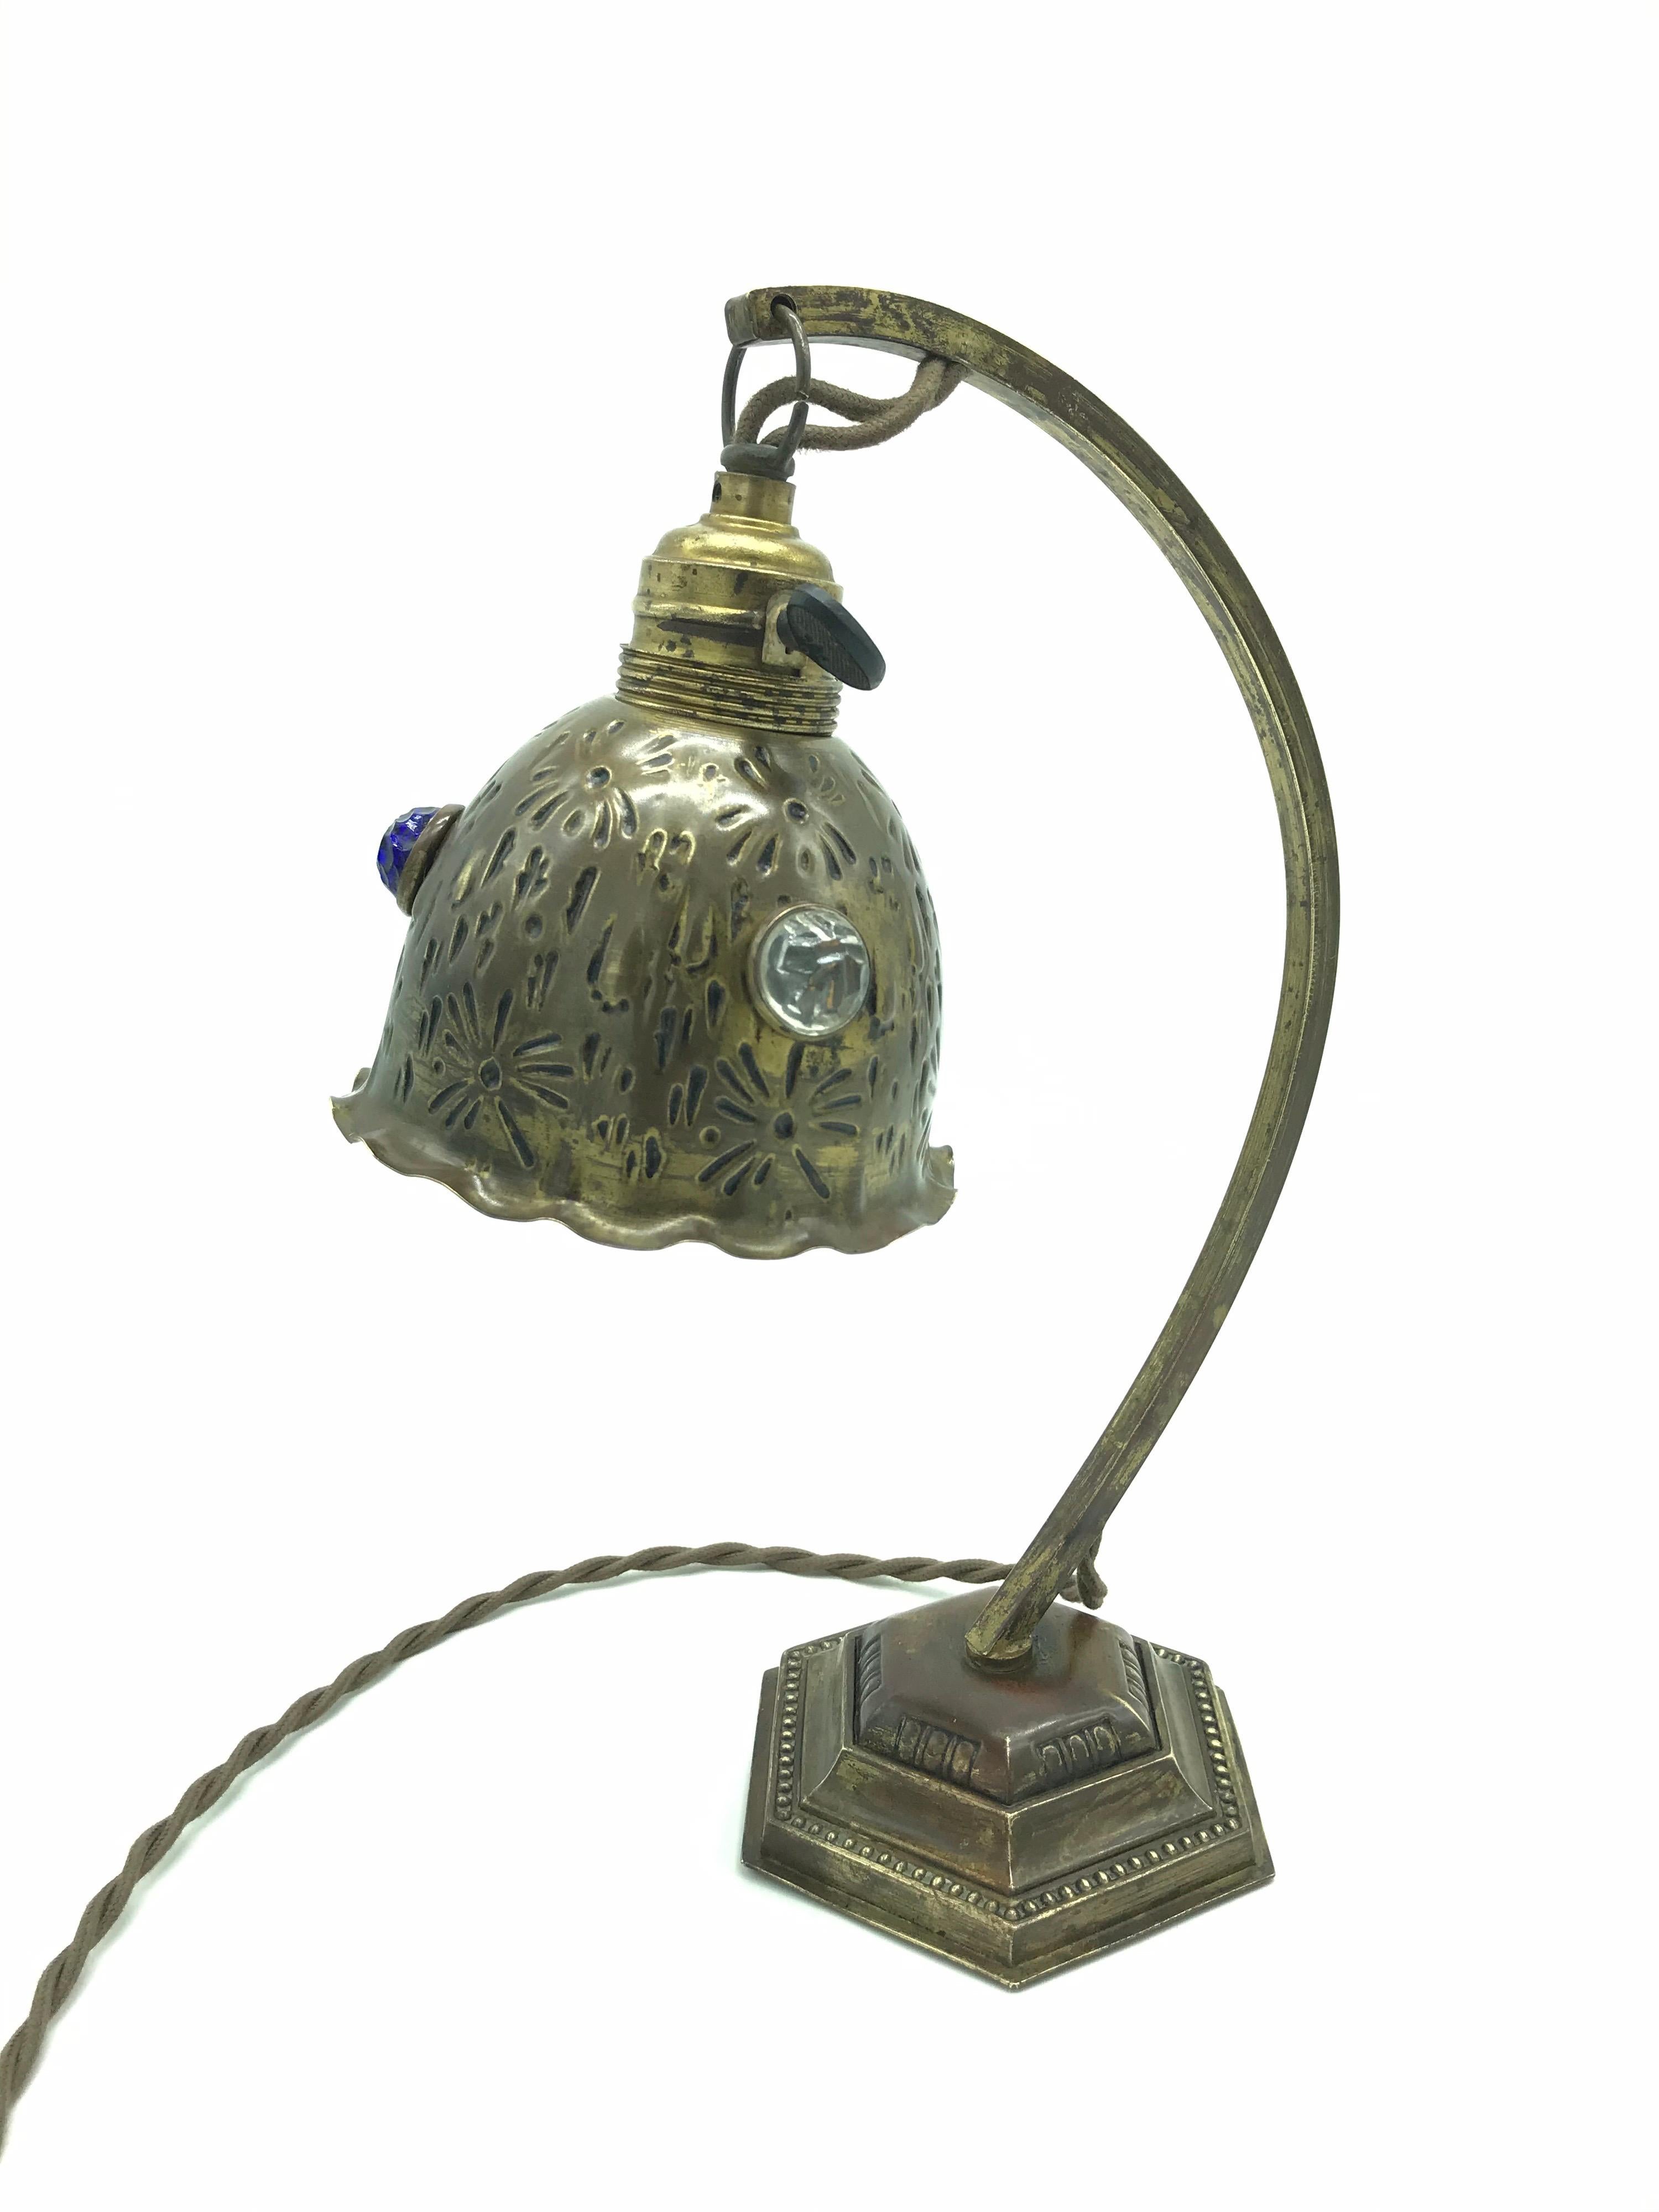 Art Nouveau table lamp from the 1920s in copper and brass. 
Inlaid glass beads in the shade. 
All original parts and still with the original brass and ceramic bulb holder. 
Rewired and can be fitted with an EU or US plug.